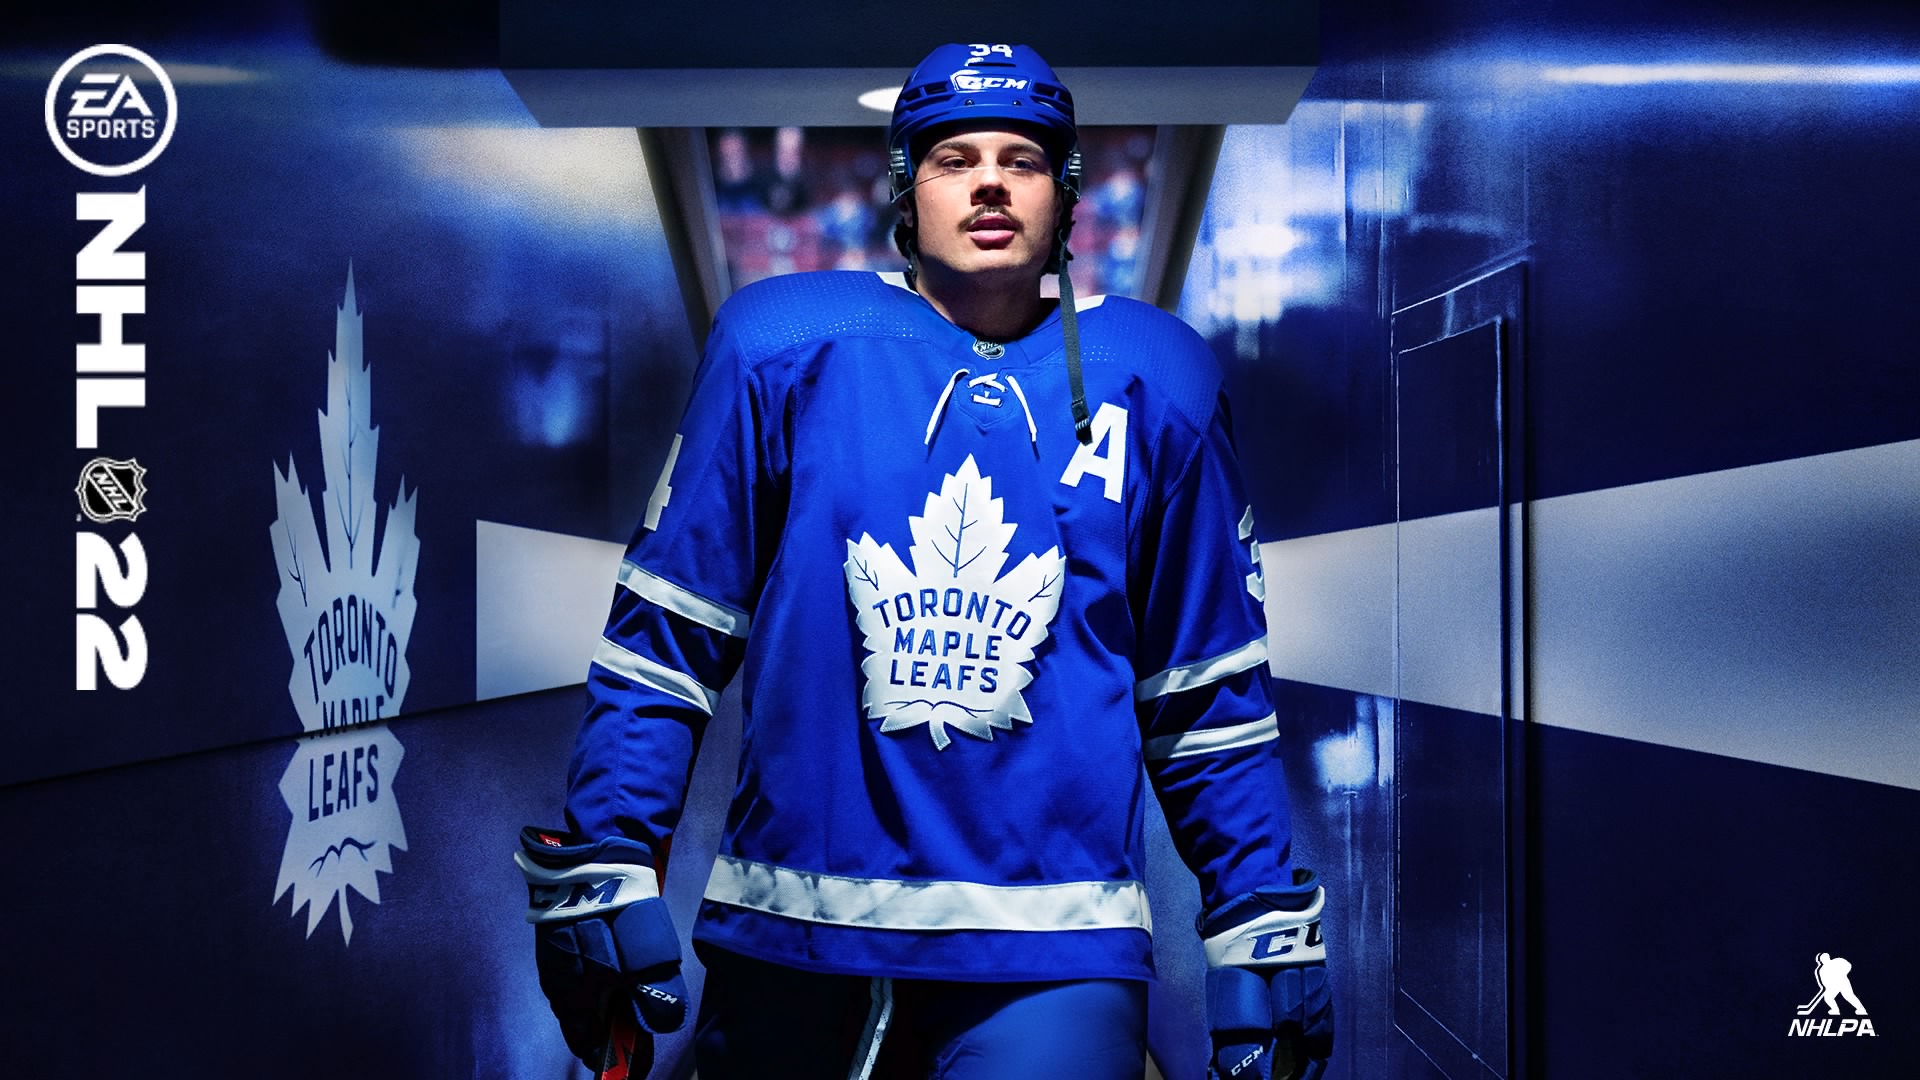 Auston Matthews is the title character of NHL22